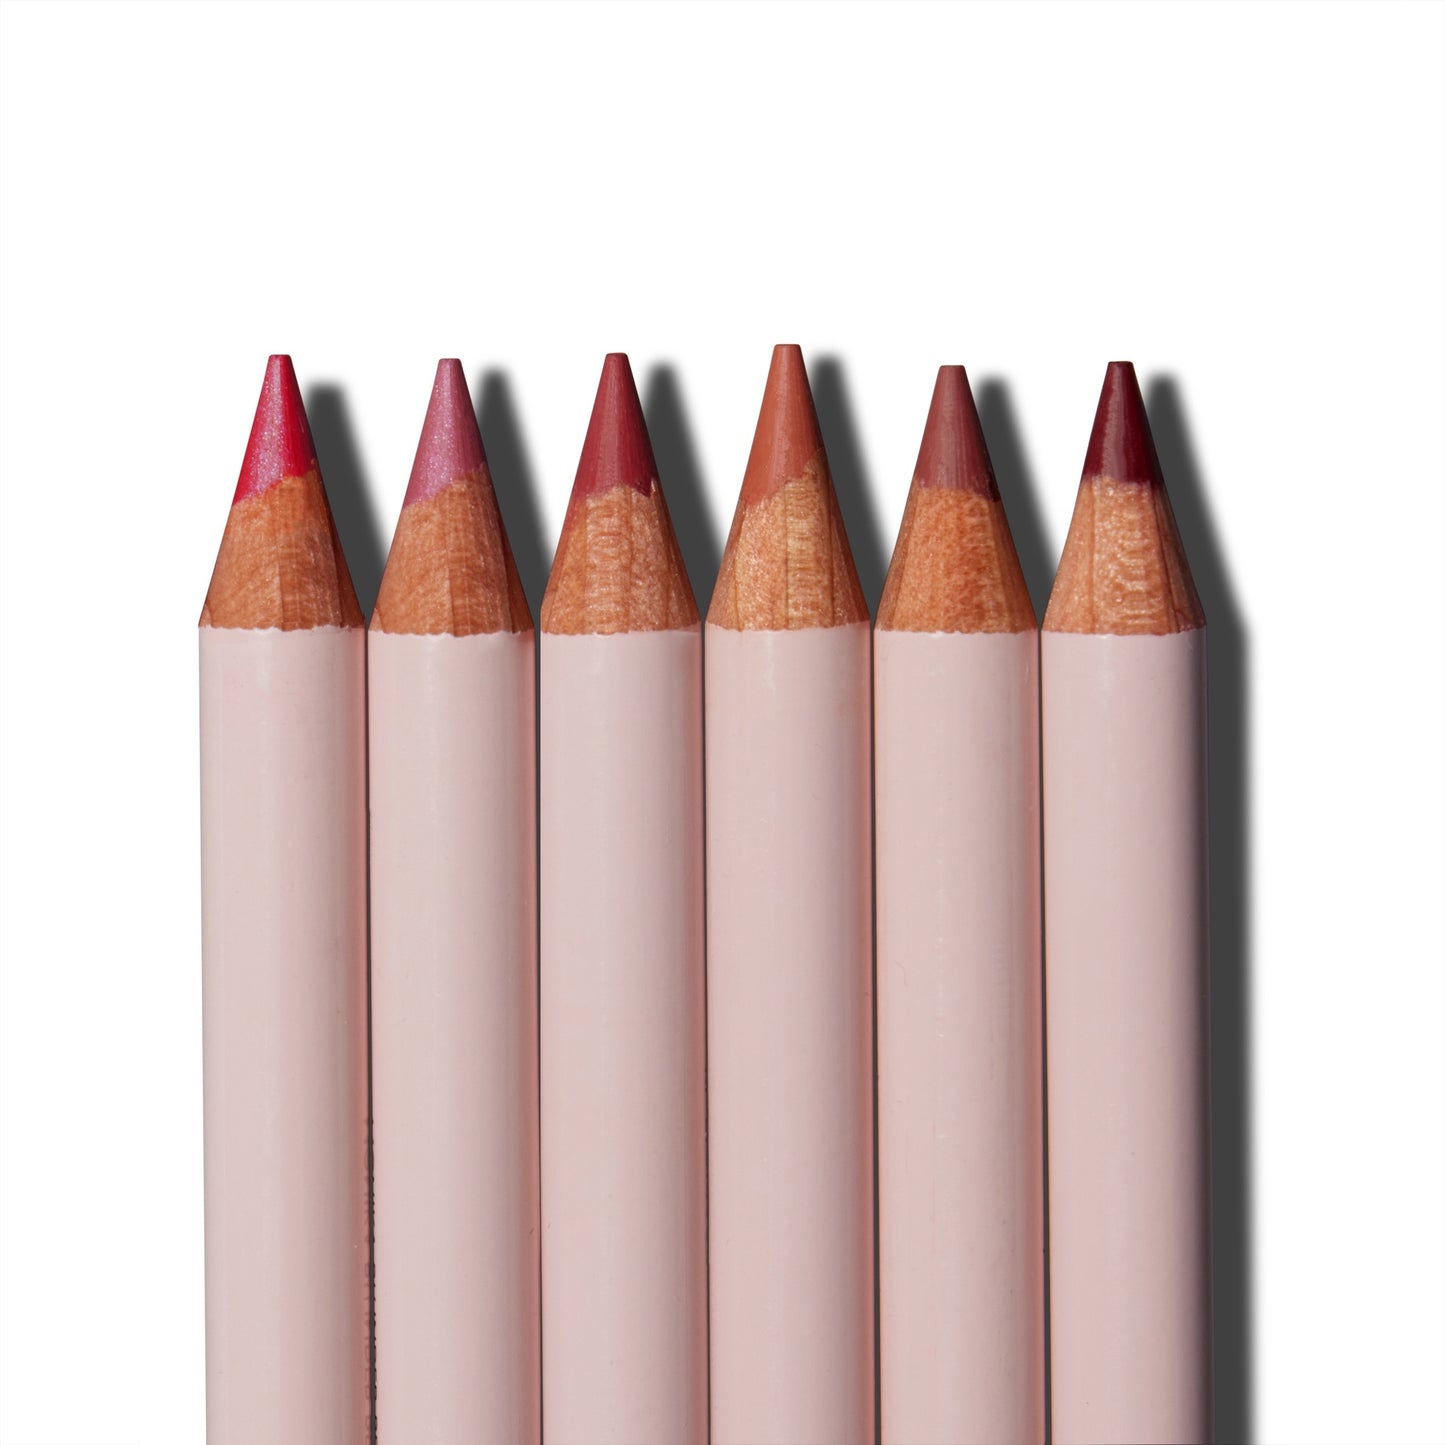 A close up of the tips of the six Monika Blunder Hot Line Lipliner pencils lined up next to each other. 